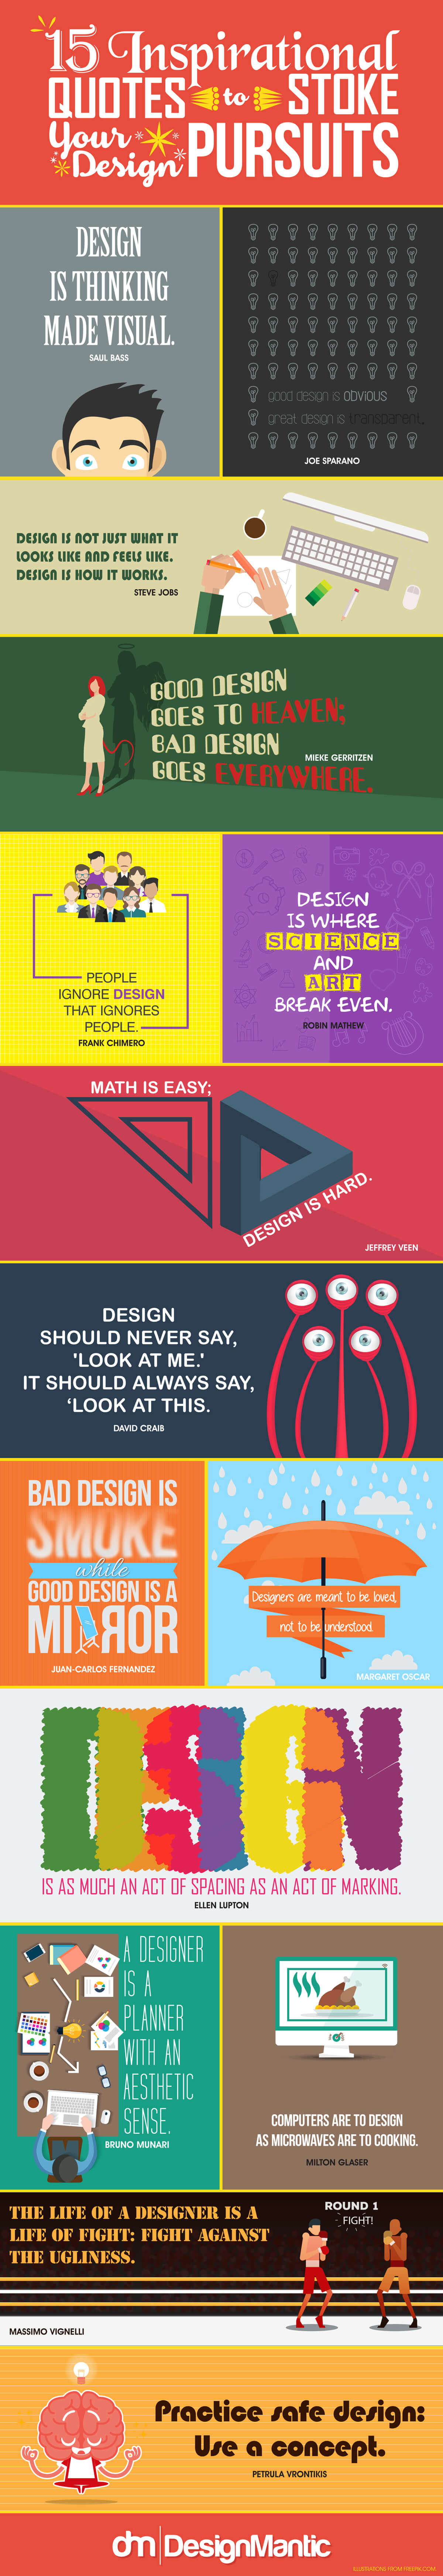 15 Inspirational Quotes To Stoke Your Design Pursuits